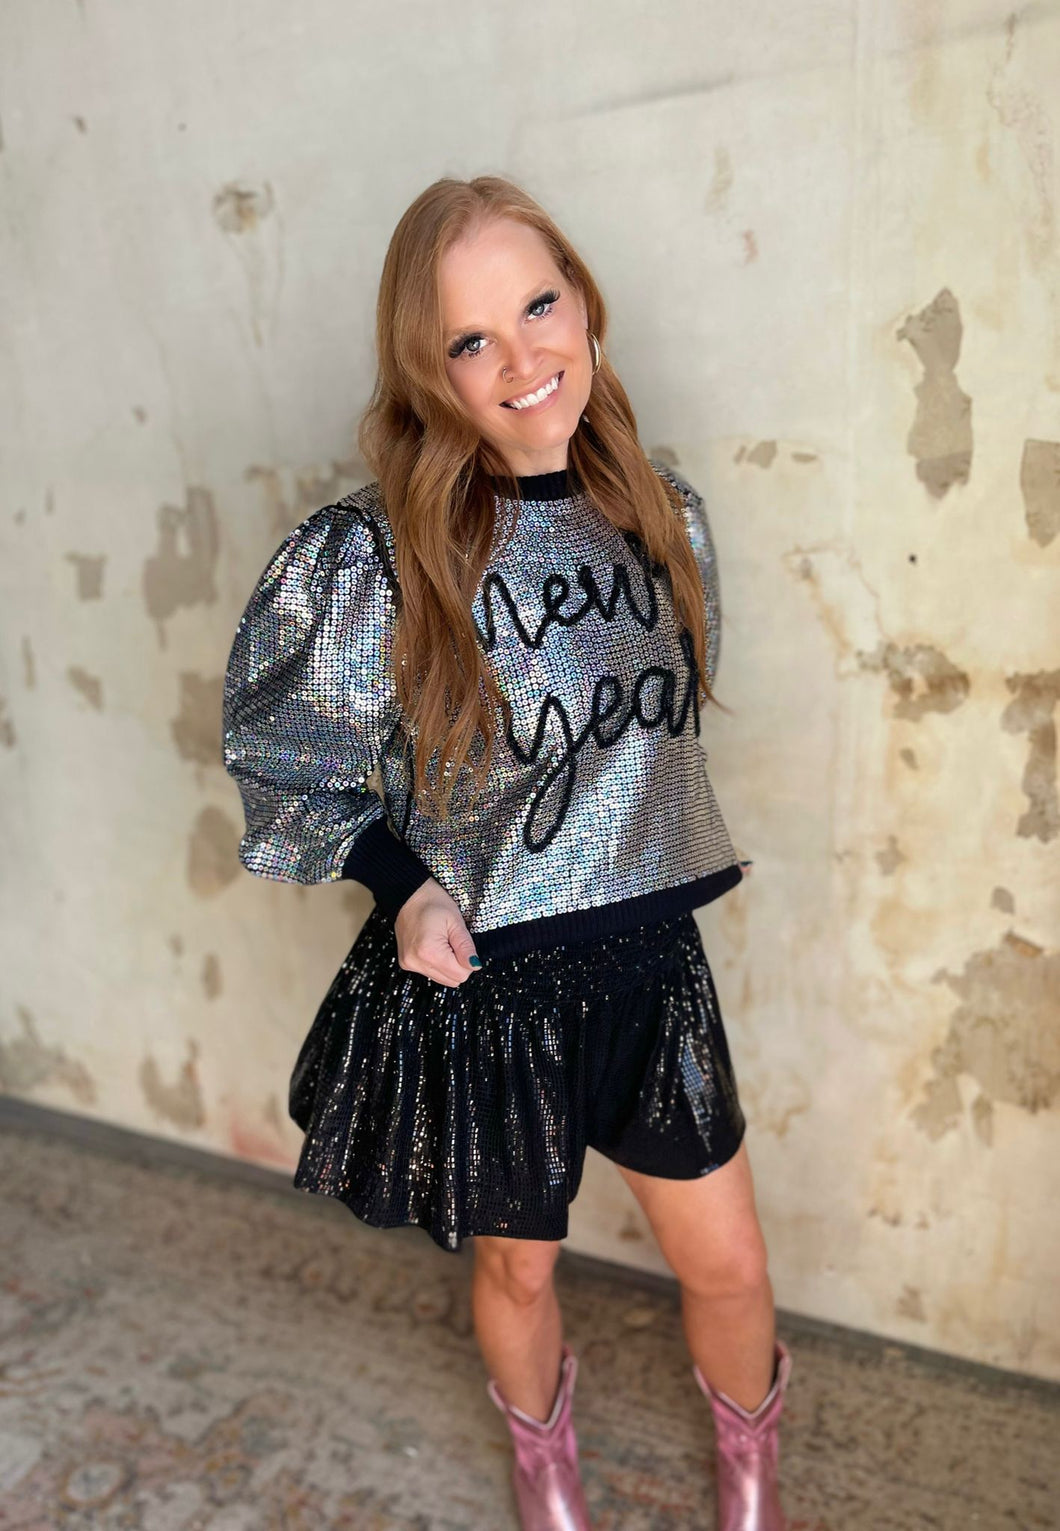 Queen of Sparkles: Black Disco Swing Shorts